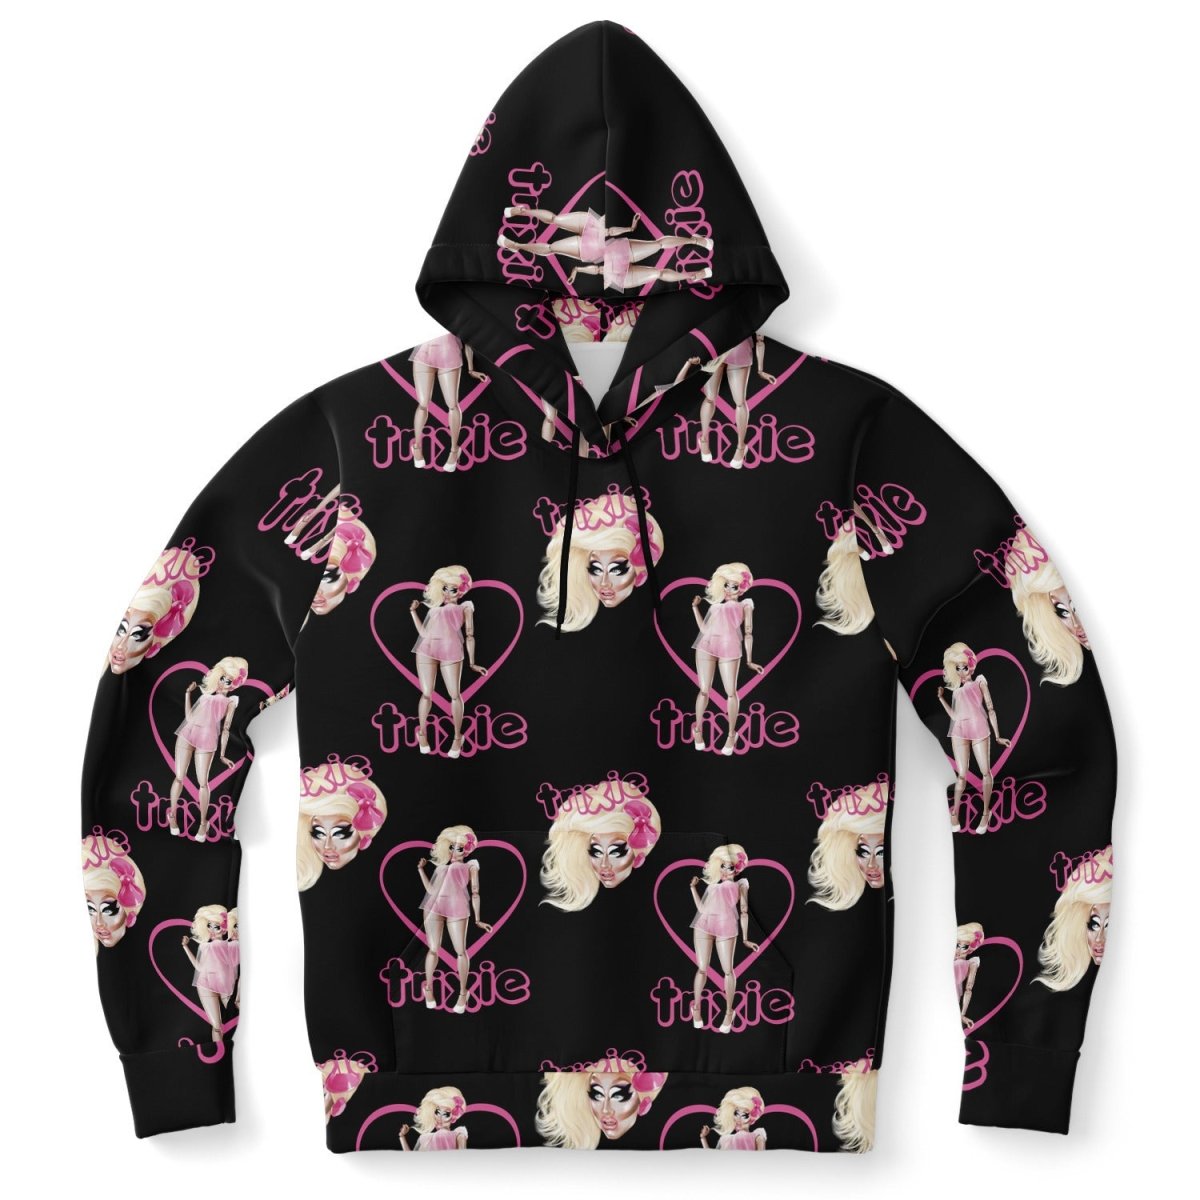 Trixie Mattel "Living Doll" All Over Print Hoodie - dragqueenmerch